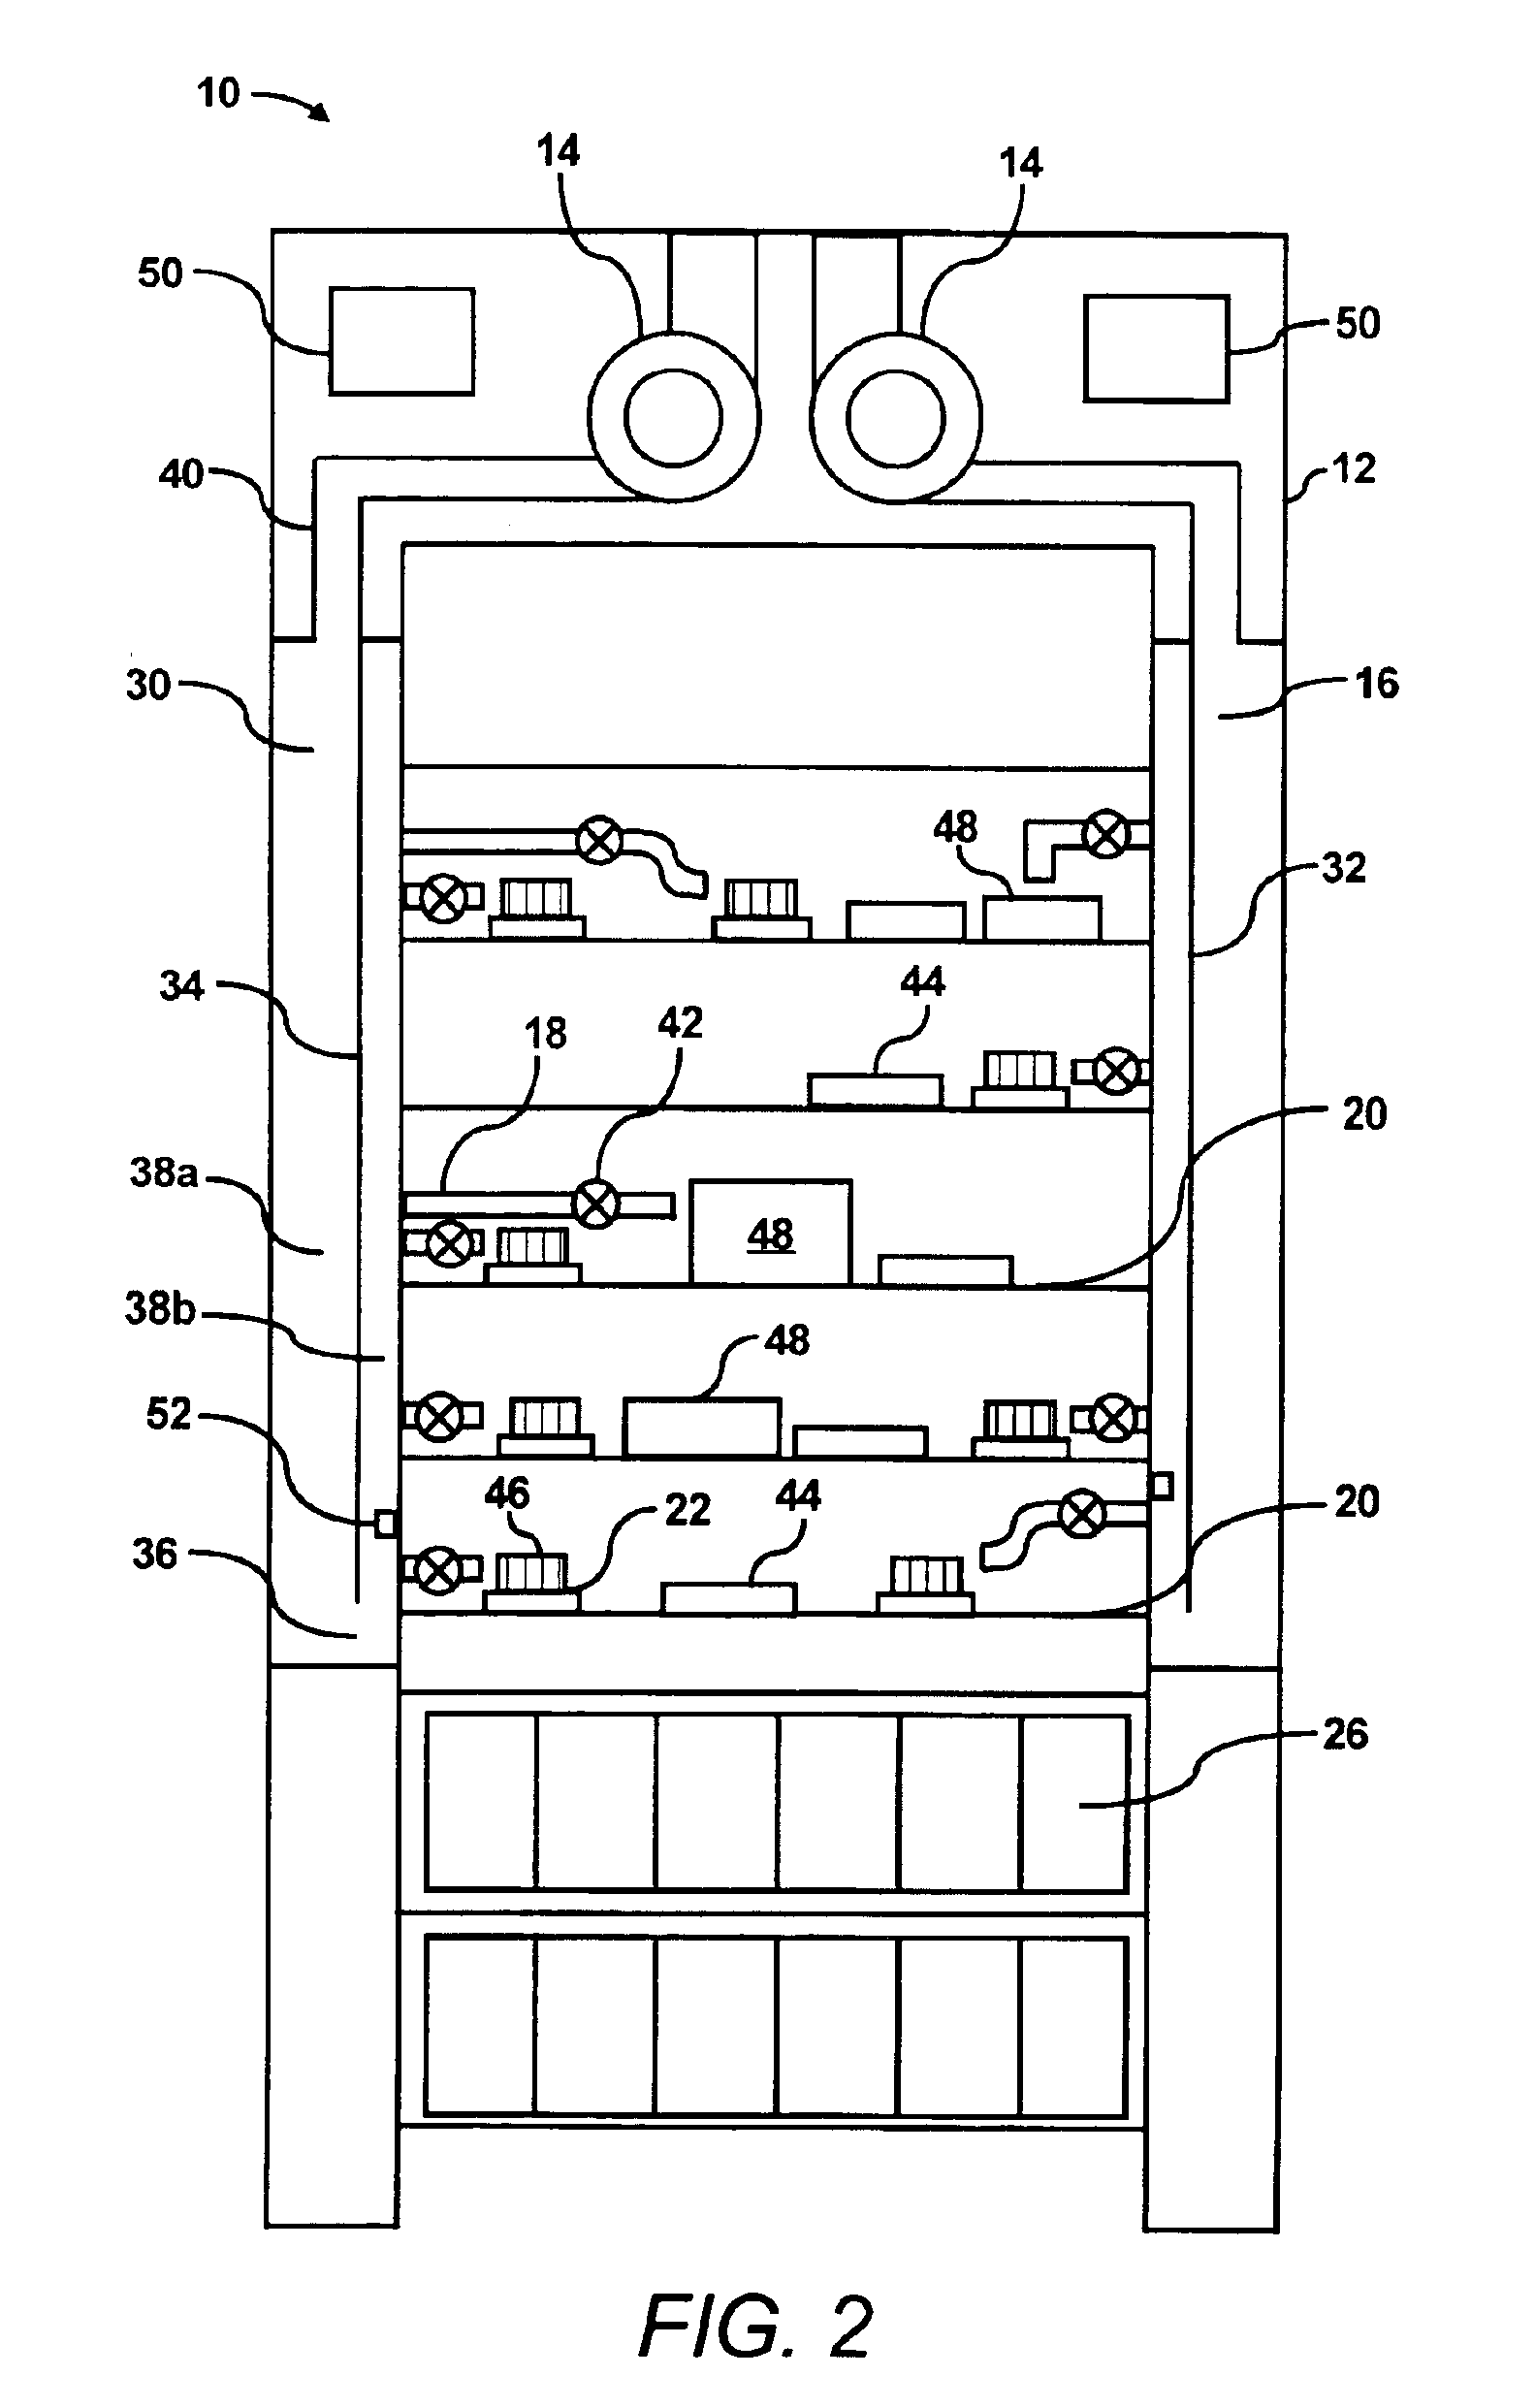 Method and apparatus for individually cooling components of electronic systems